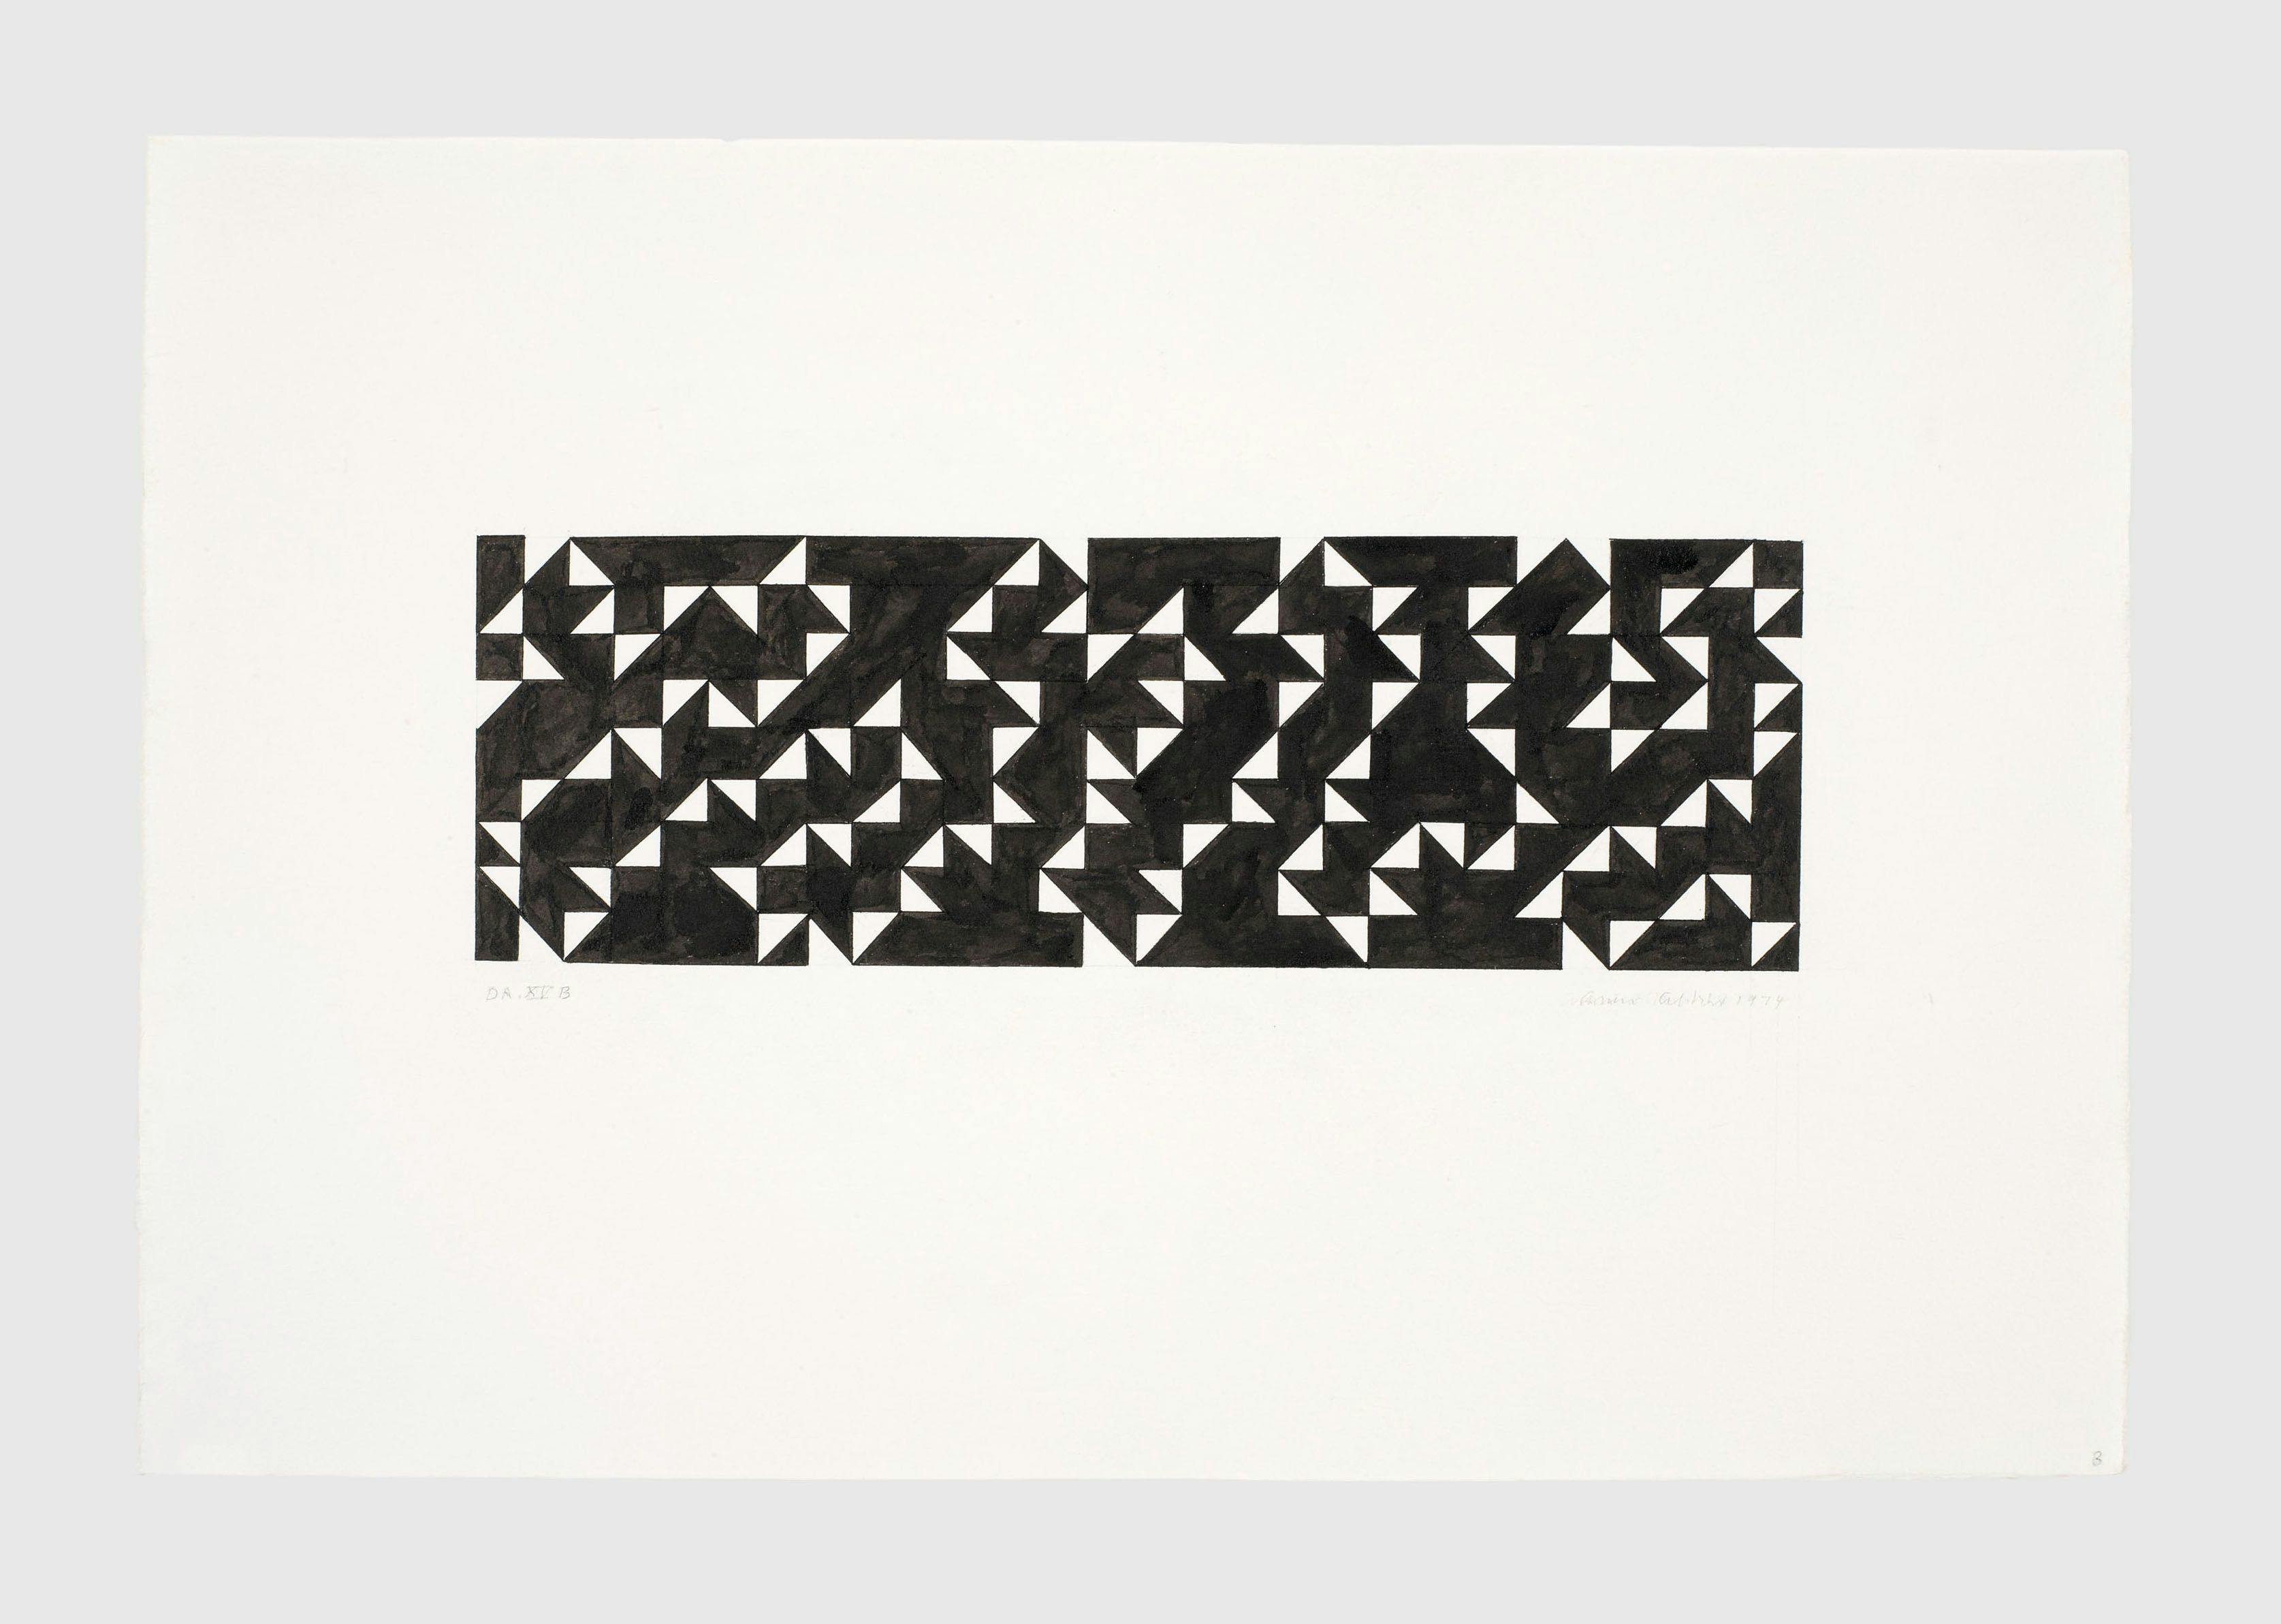 A drawing by Anni Albers, titled DR XV B, dated 1974.